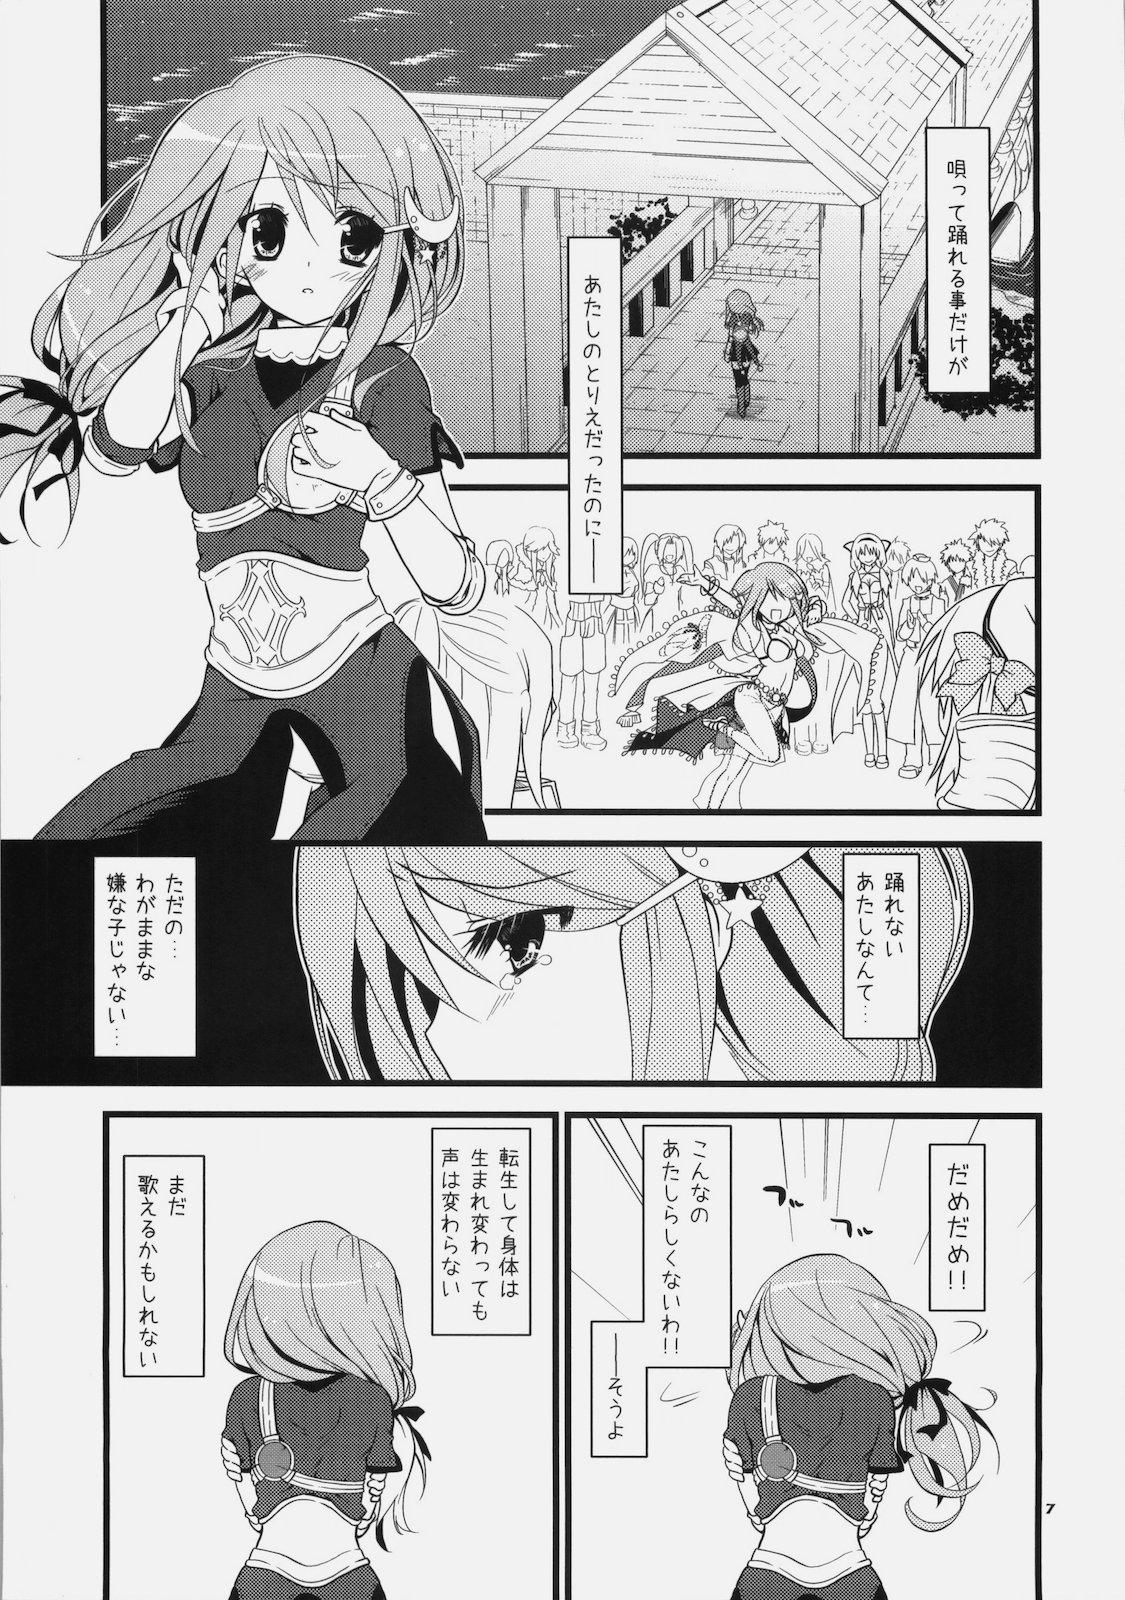 Rimming Daily RO 3 - Ragnarok online Rola - Page 7